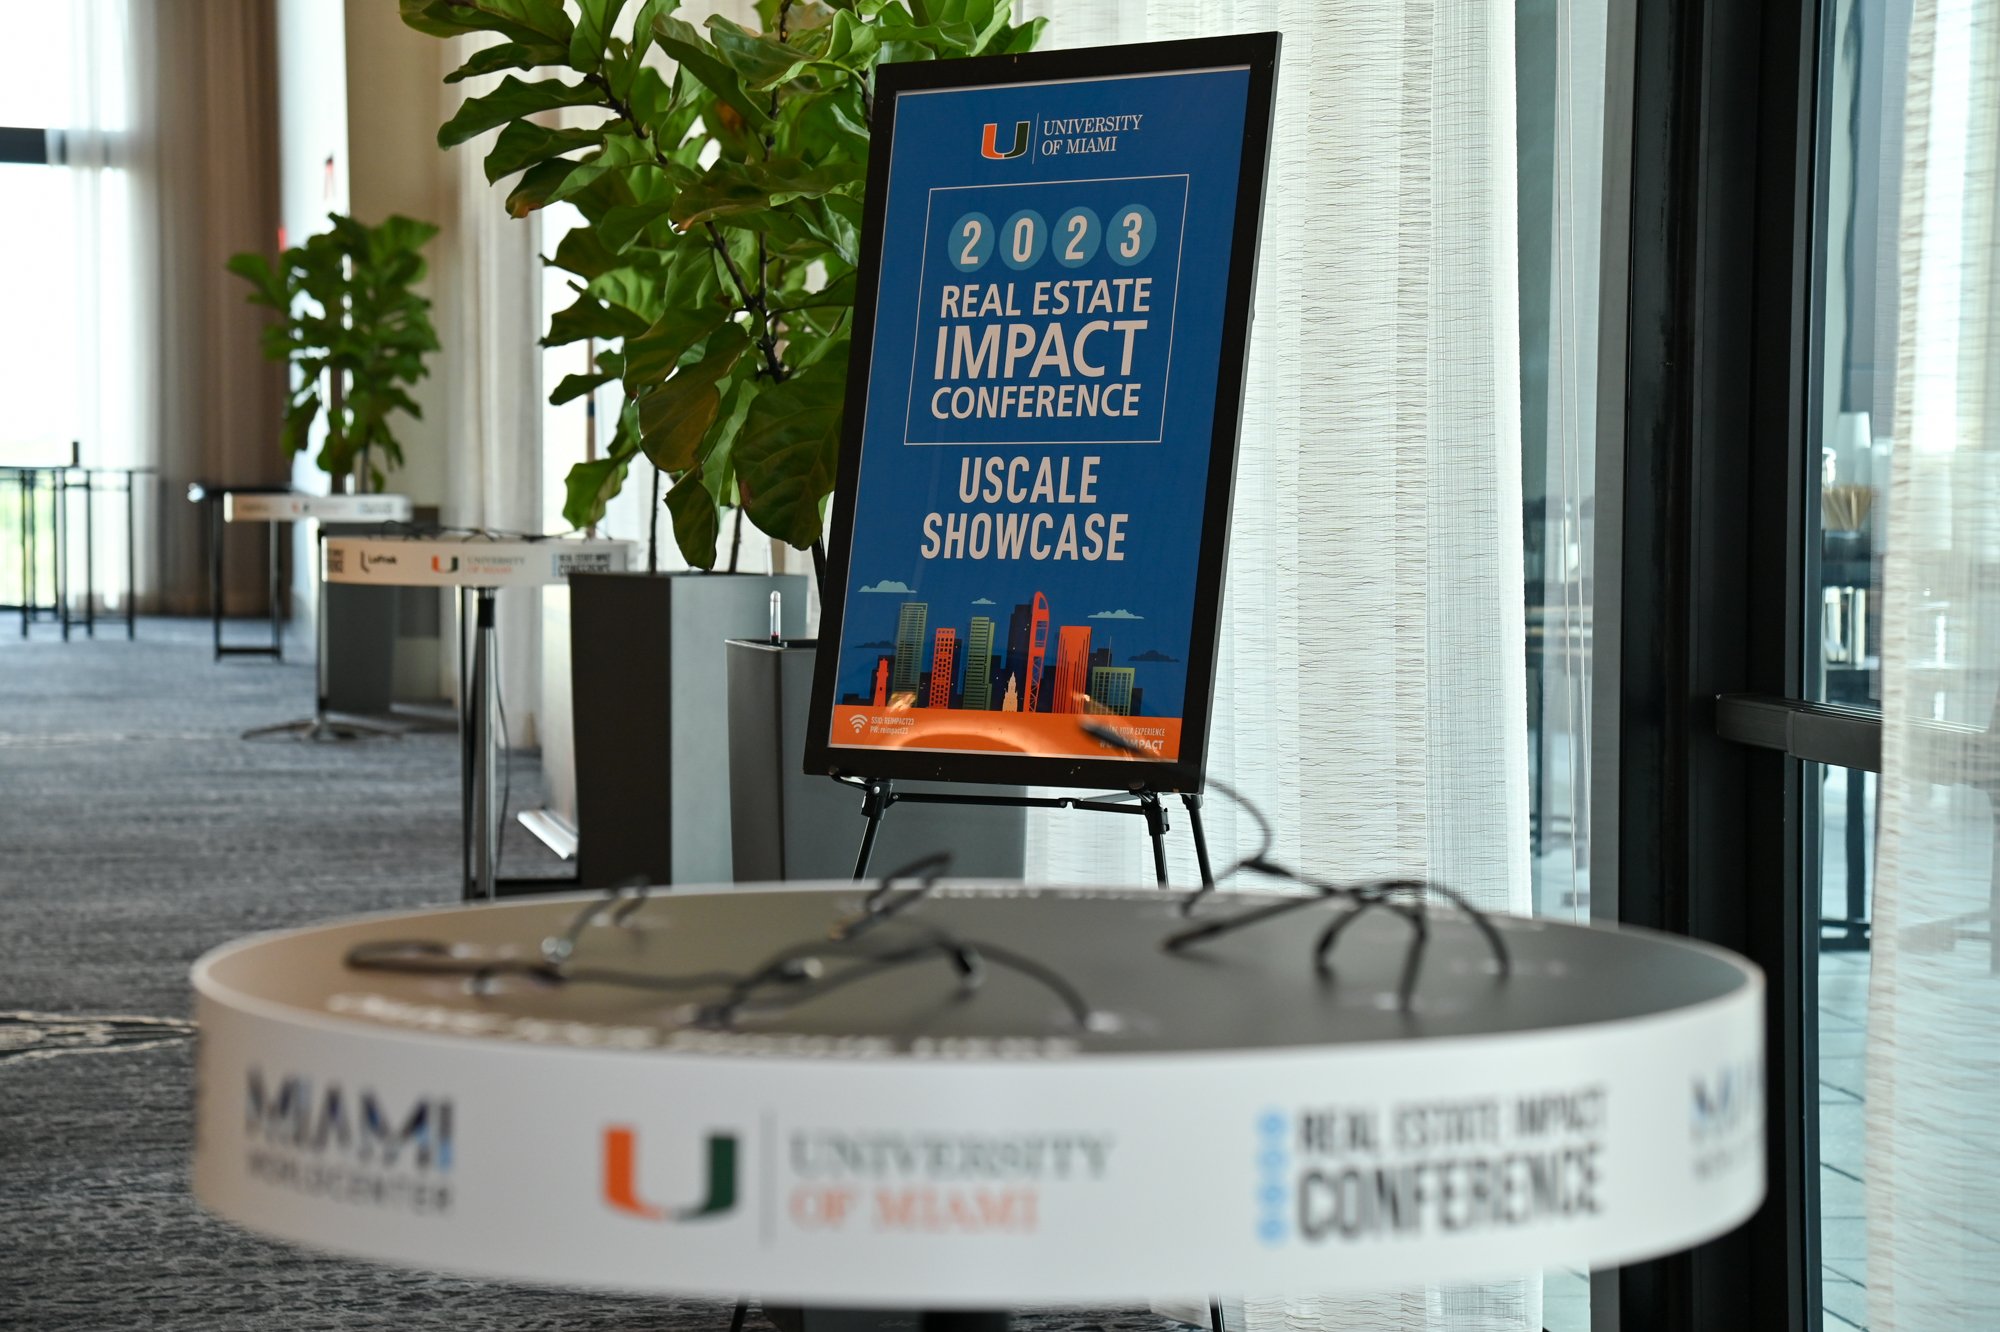 University of Miami Real Estate Impact Conference 2023 The Largest Edition Yet As Real Estate Leaders Discuss The State of Miami Real Estate 9.jpg